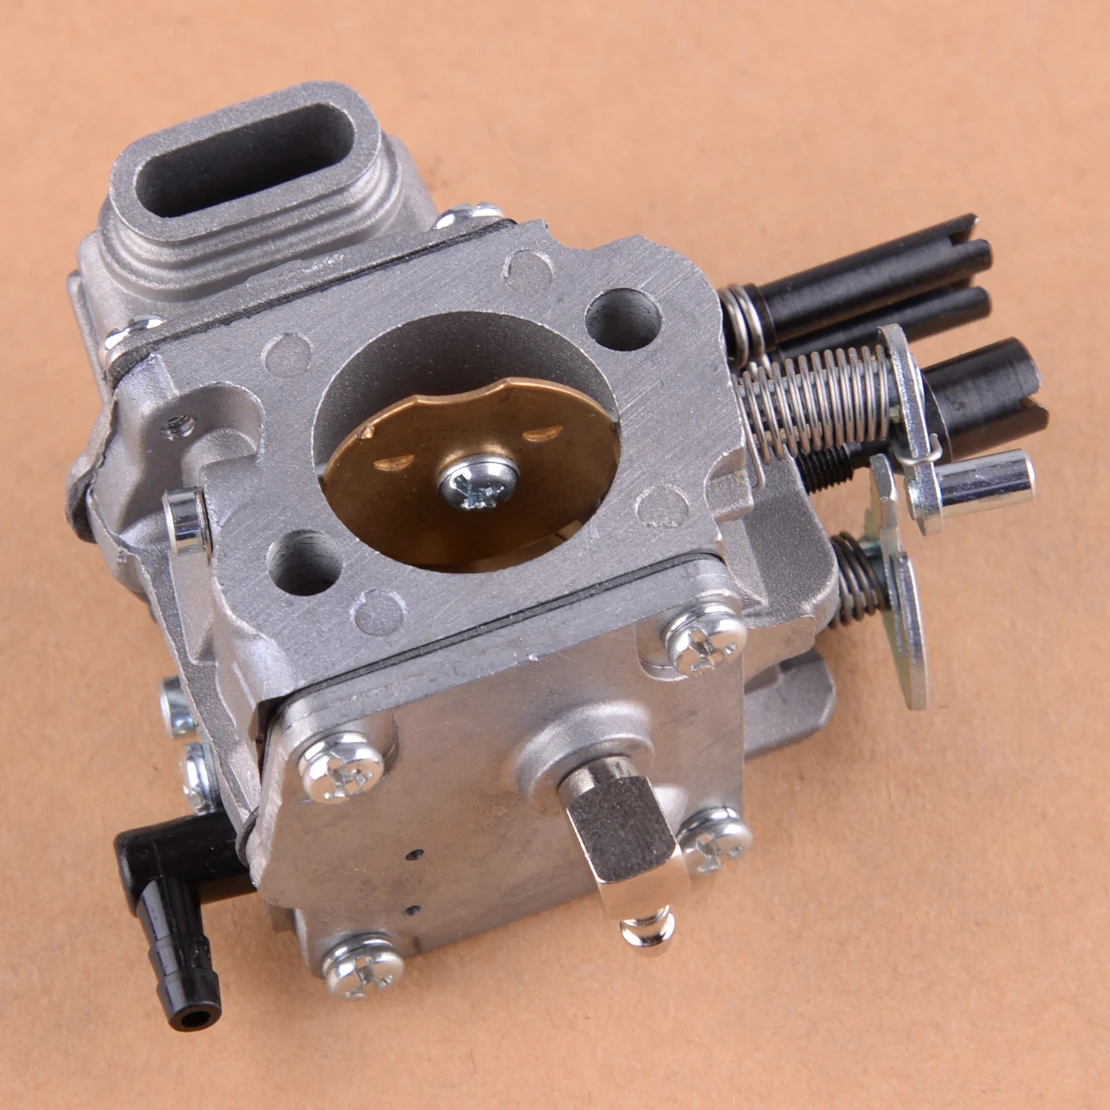 LETAOSK Carburetor Carb 1122 120 0621 1122 120 0623 Fit for Stihl 066 064 MS650 MS660 Chainsaw Replacement